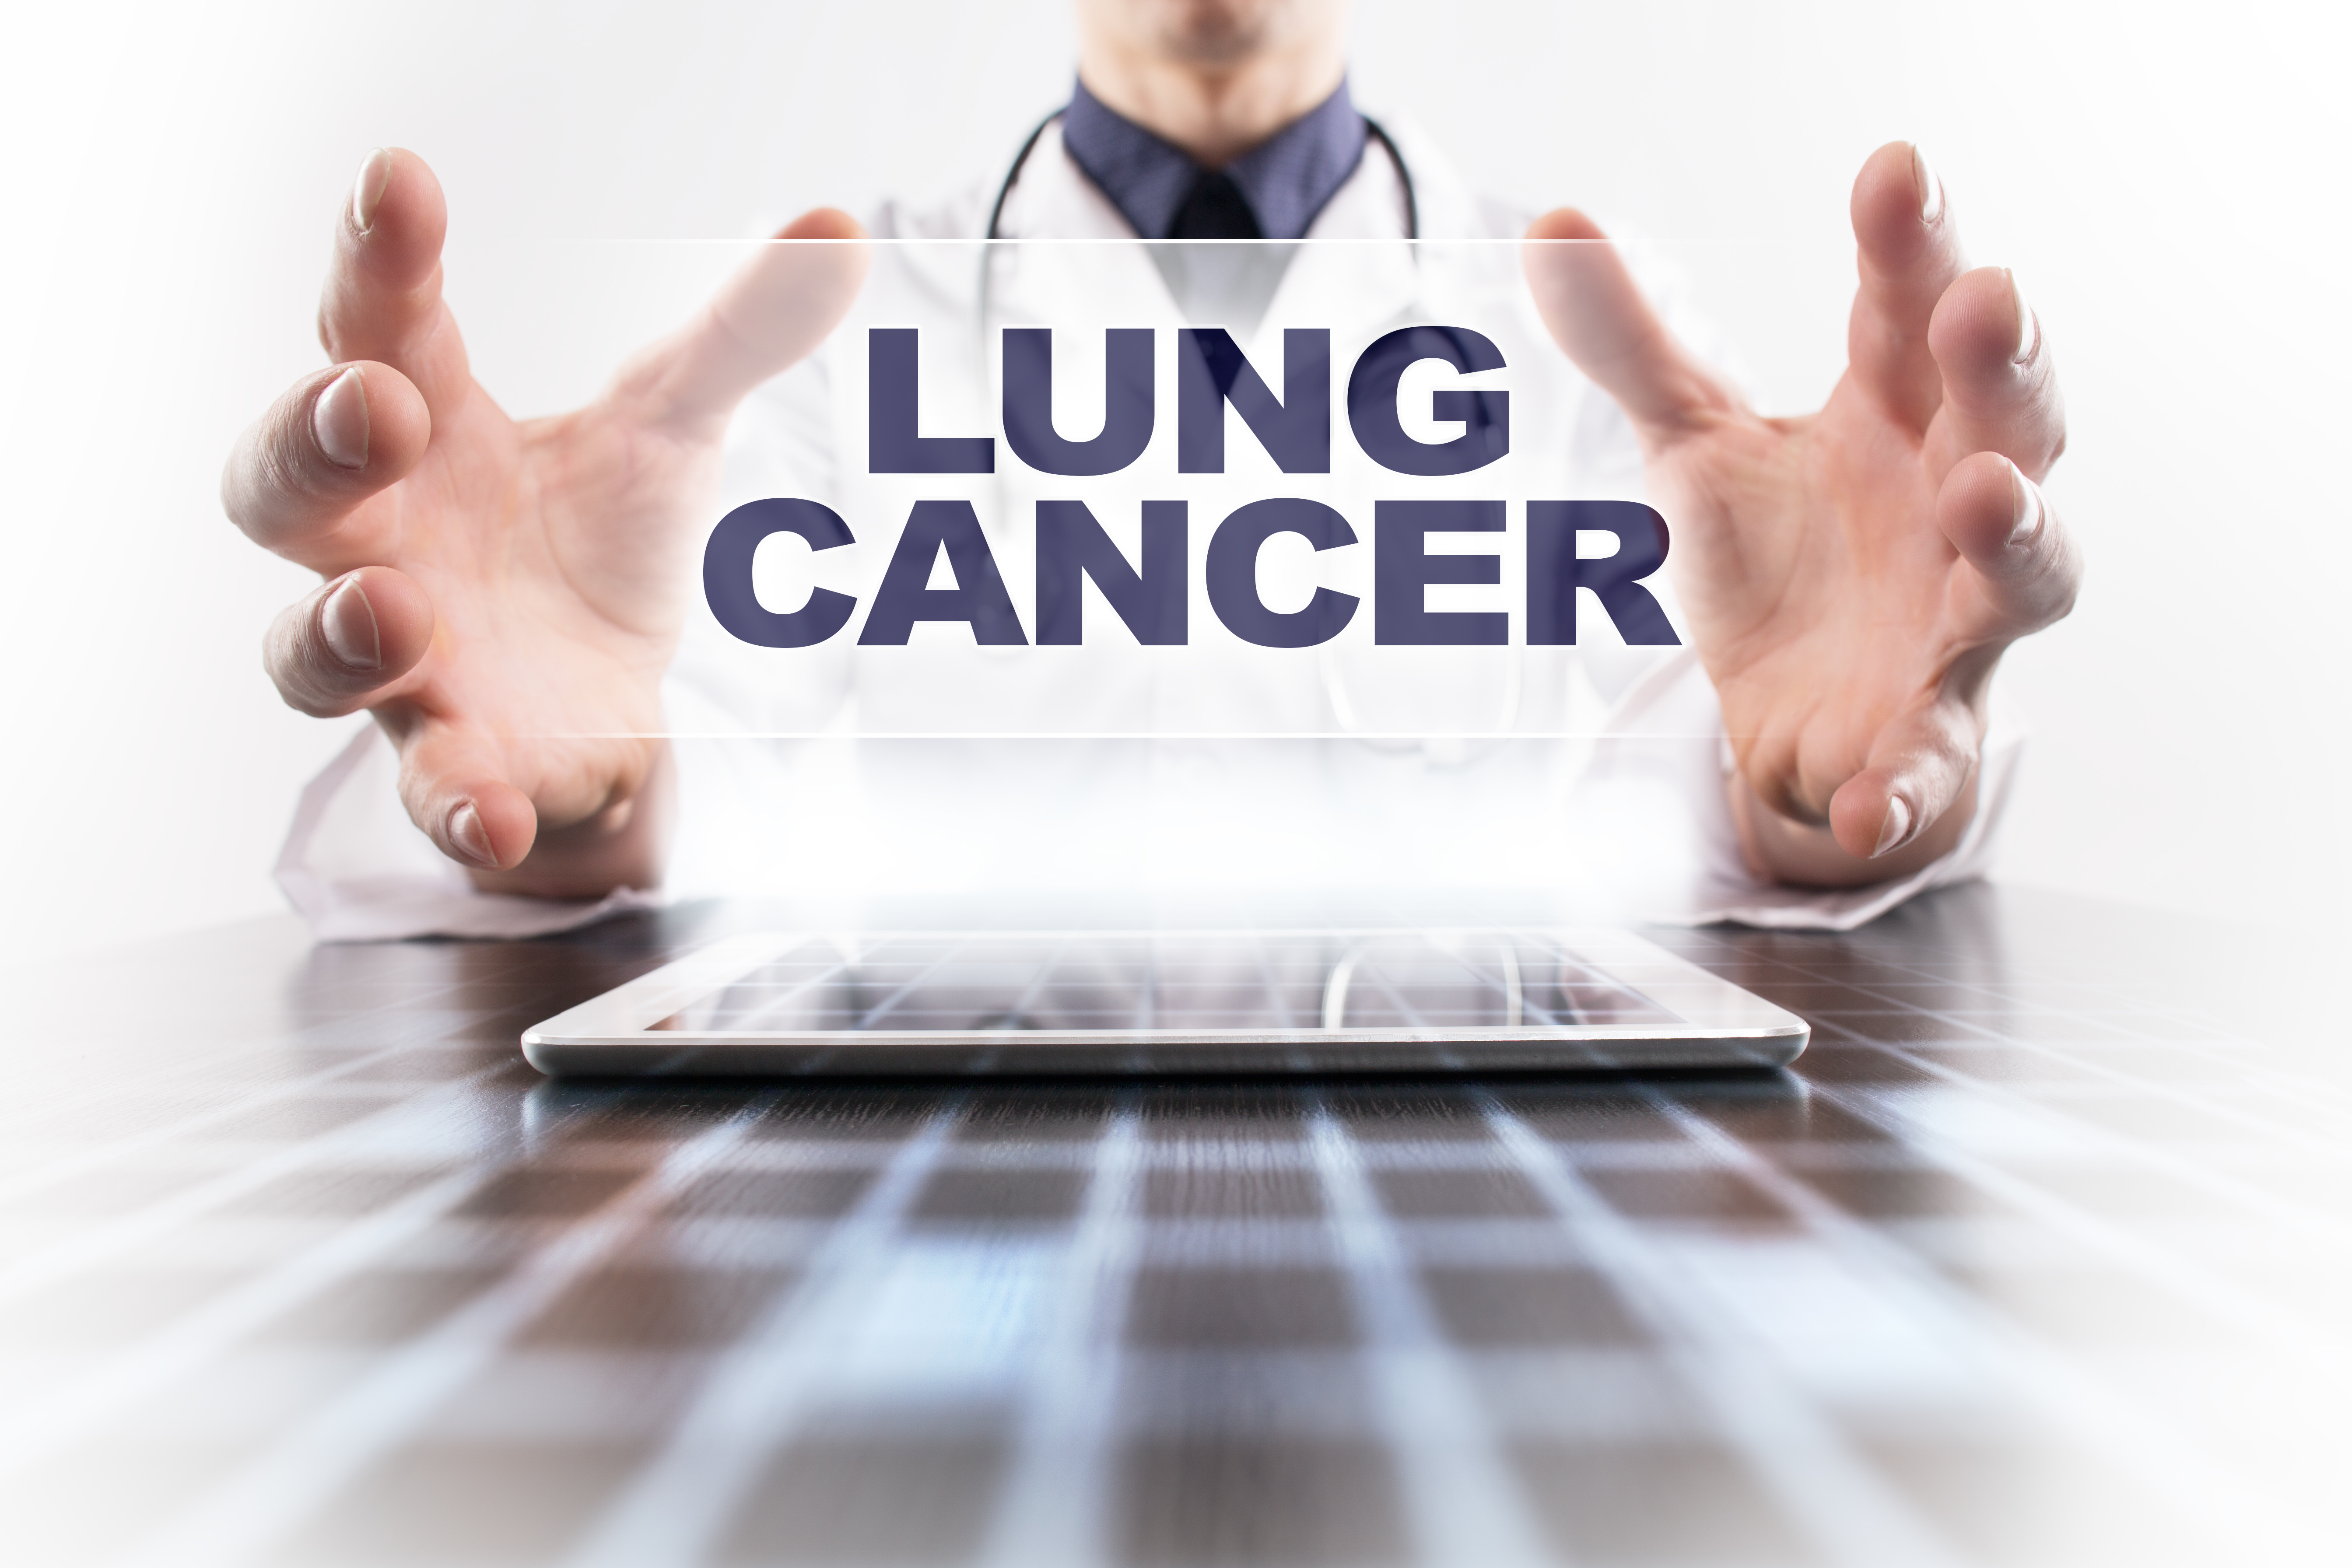 life-insurance-with-lung-cancer-concept